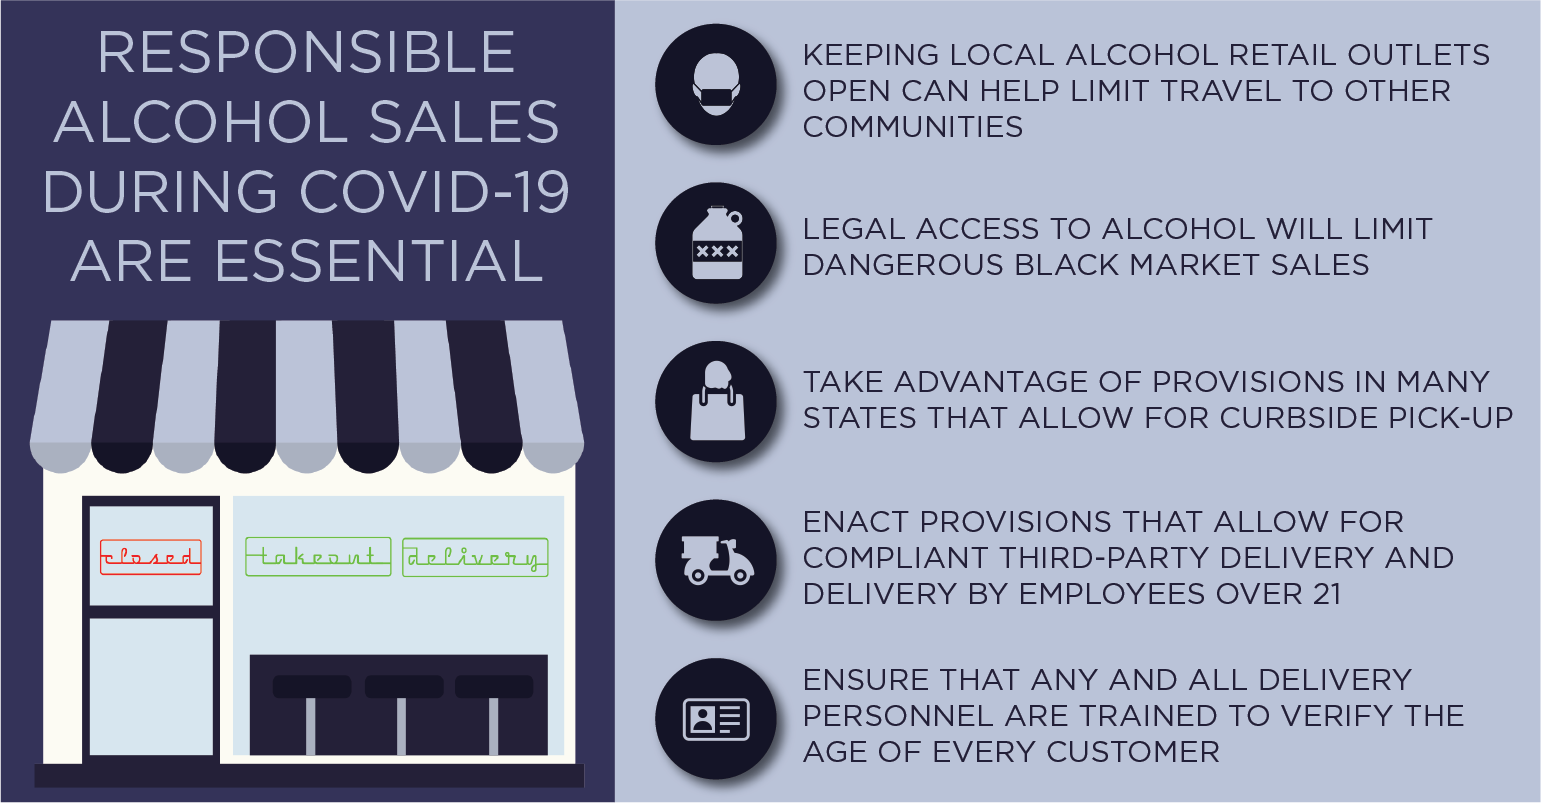 Responsible Alcohol Sales During COVID-19 Are Essential